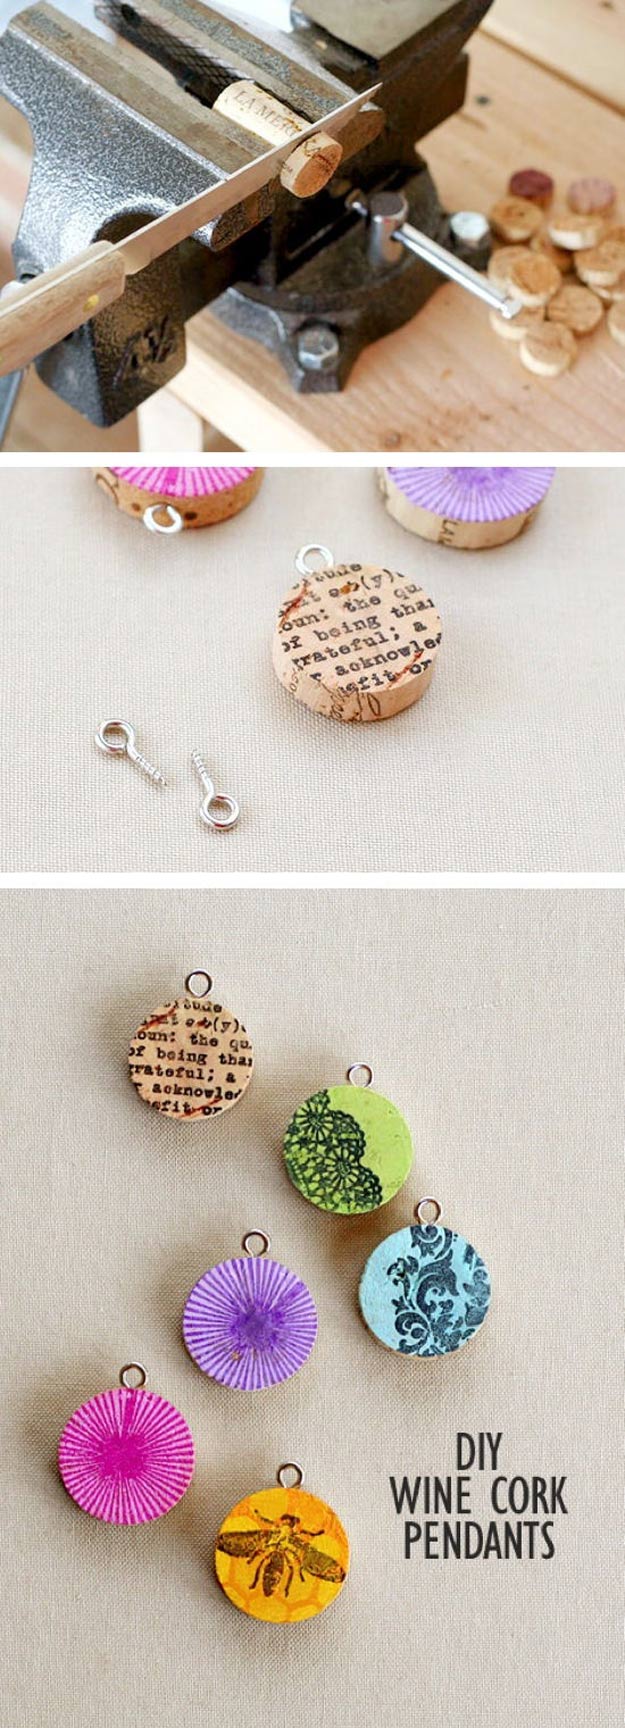 Cool DIY Ideas for Fun and Easy Crafts - DIY Wine Cork Crafts - Colorful Handmade Pendant is Fun DIY Jewelry Idea - DIY Moon Pendant for Easy DIY Lighting in Teens Rooms - Dip Dyed String Wall Hanging - DIY Mini Easel Makes Fun DIY Room Decor Idea - Awesome Pinterest DIYs that Are Not Impossible To Make - Creative Do It Yourself Craft Projects for Adults, Teens and Tweens #diyteens #teencrafts #funcrafts #fundiy #diyideas 